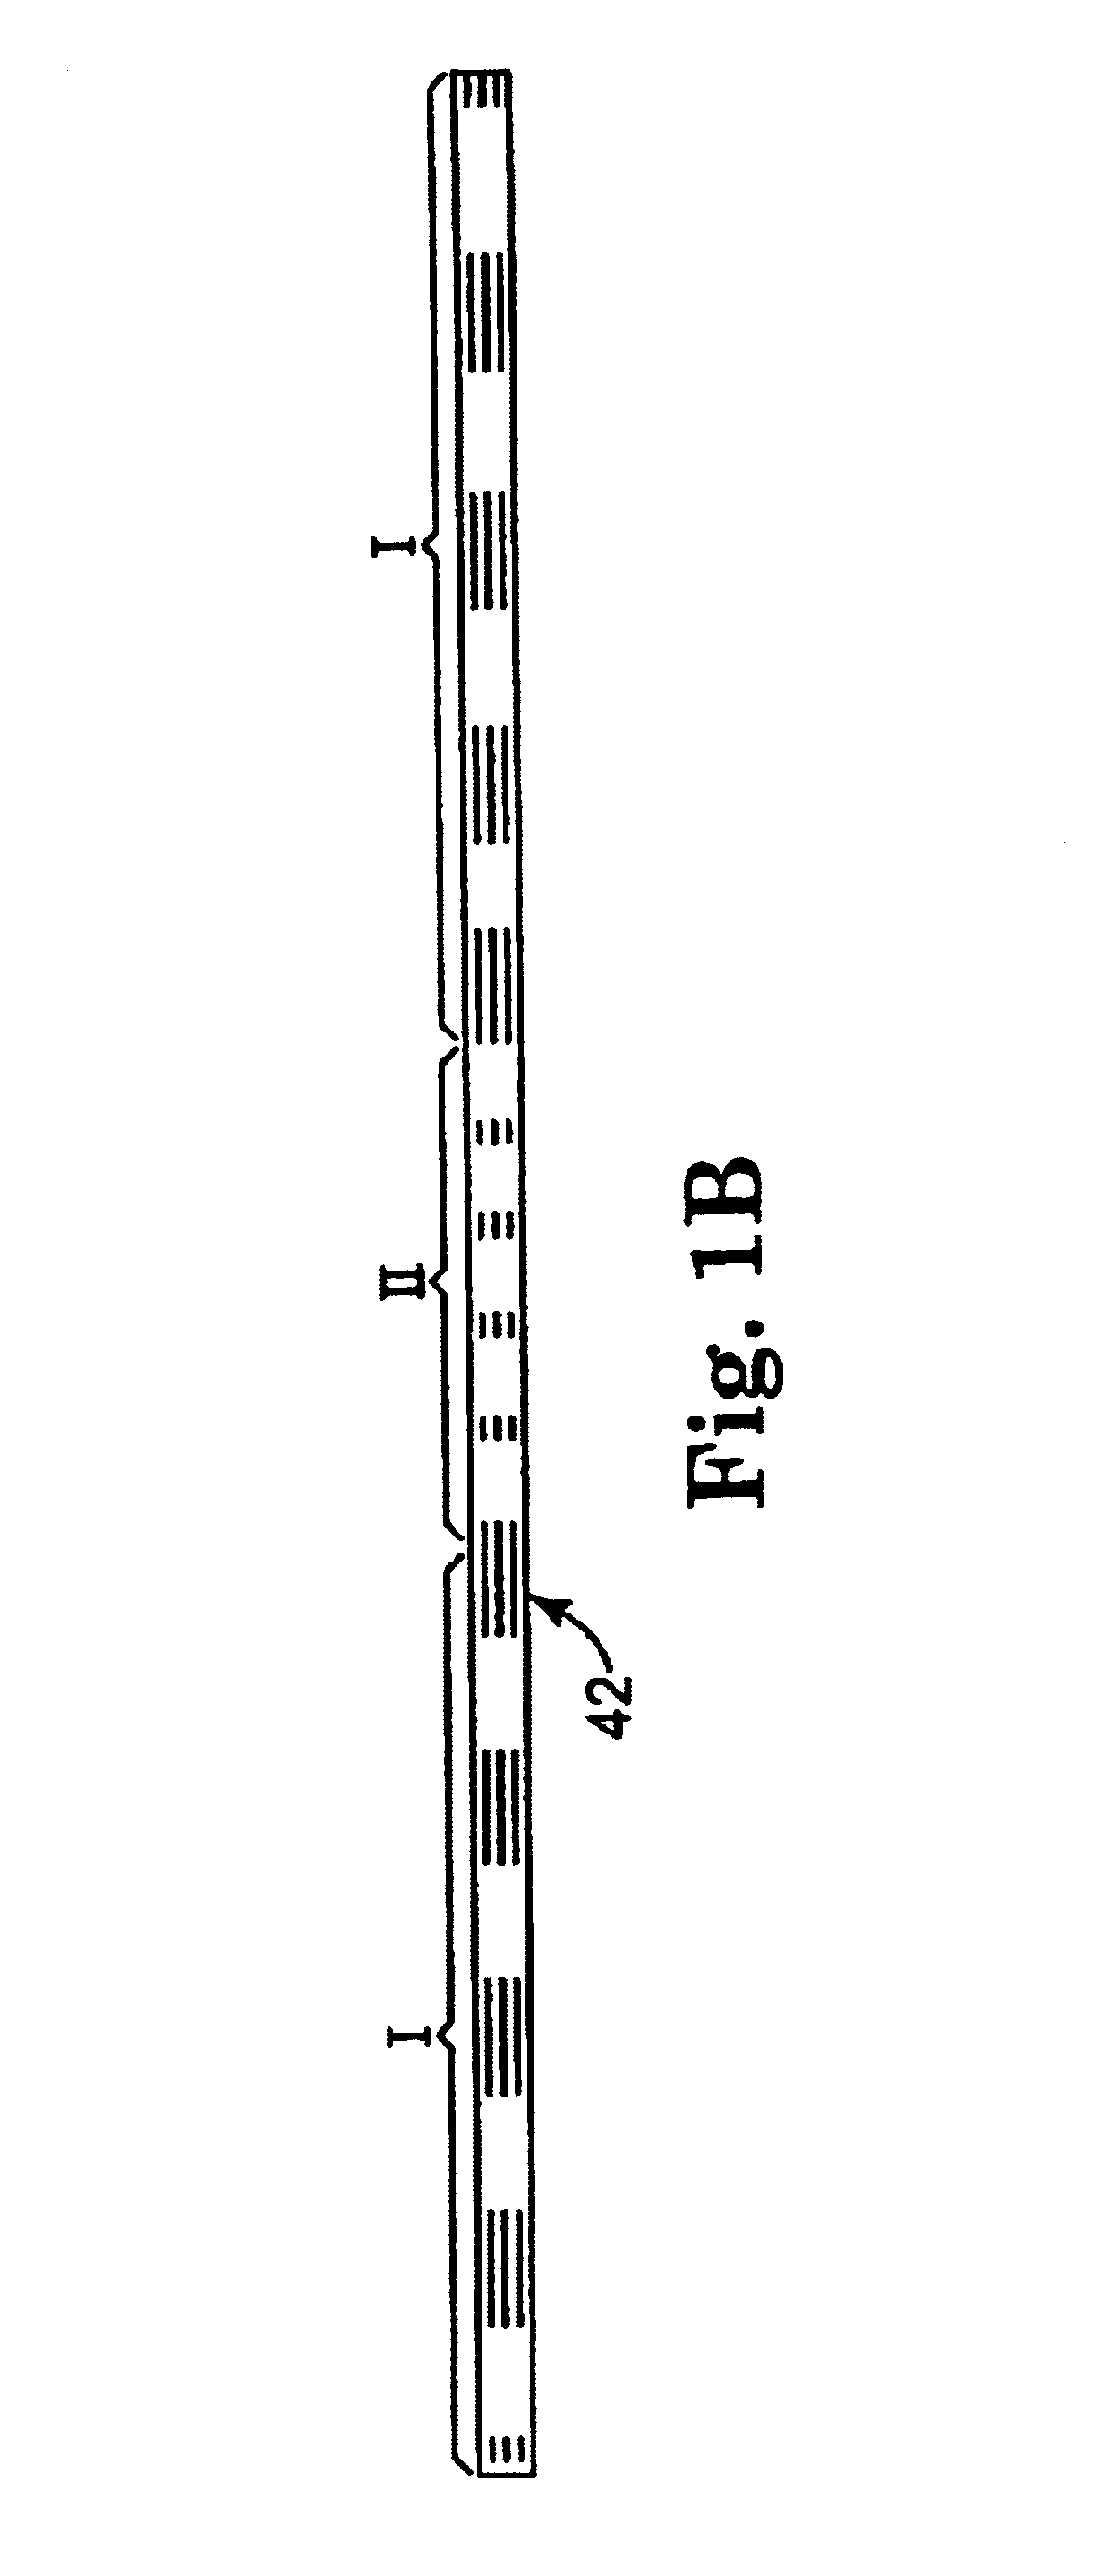 Implantable article and method for treating urinary incontinence using means for repositioning the implantable article